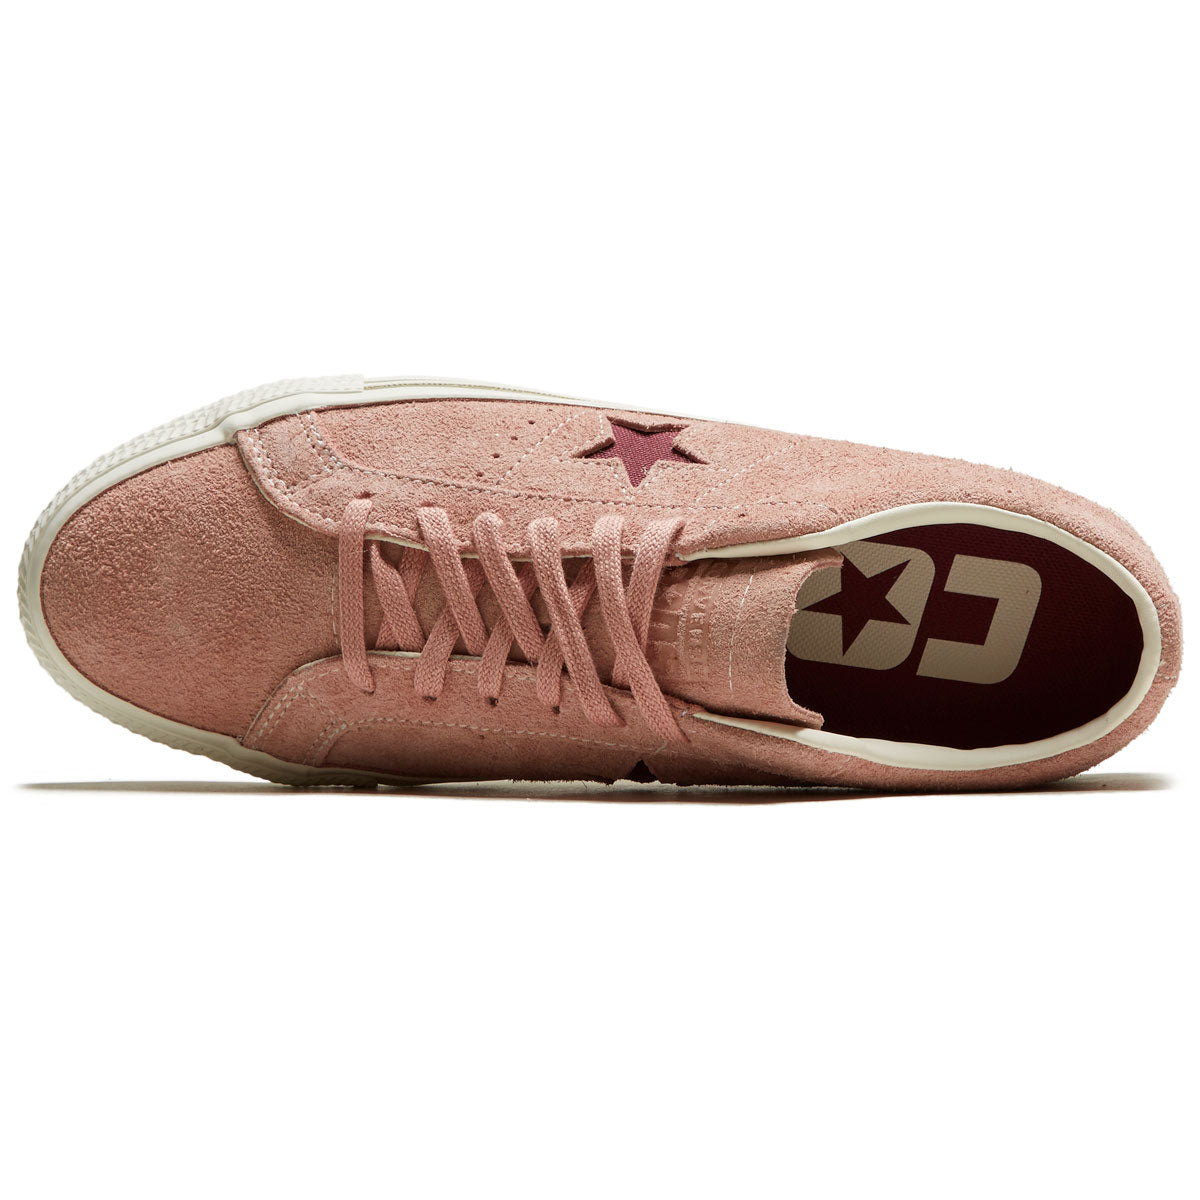 Converse One Star Pro Shoes - Canyon Dusk/Cherry Vision – CCS